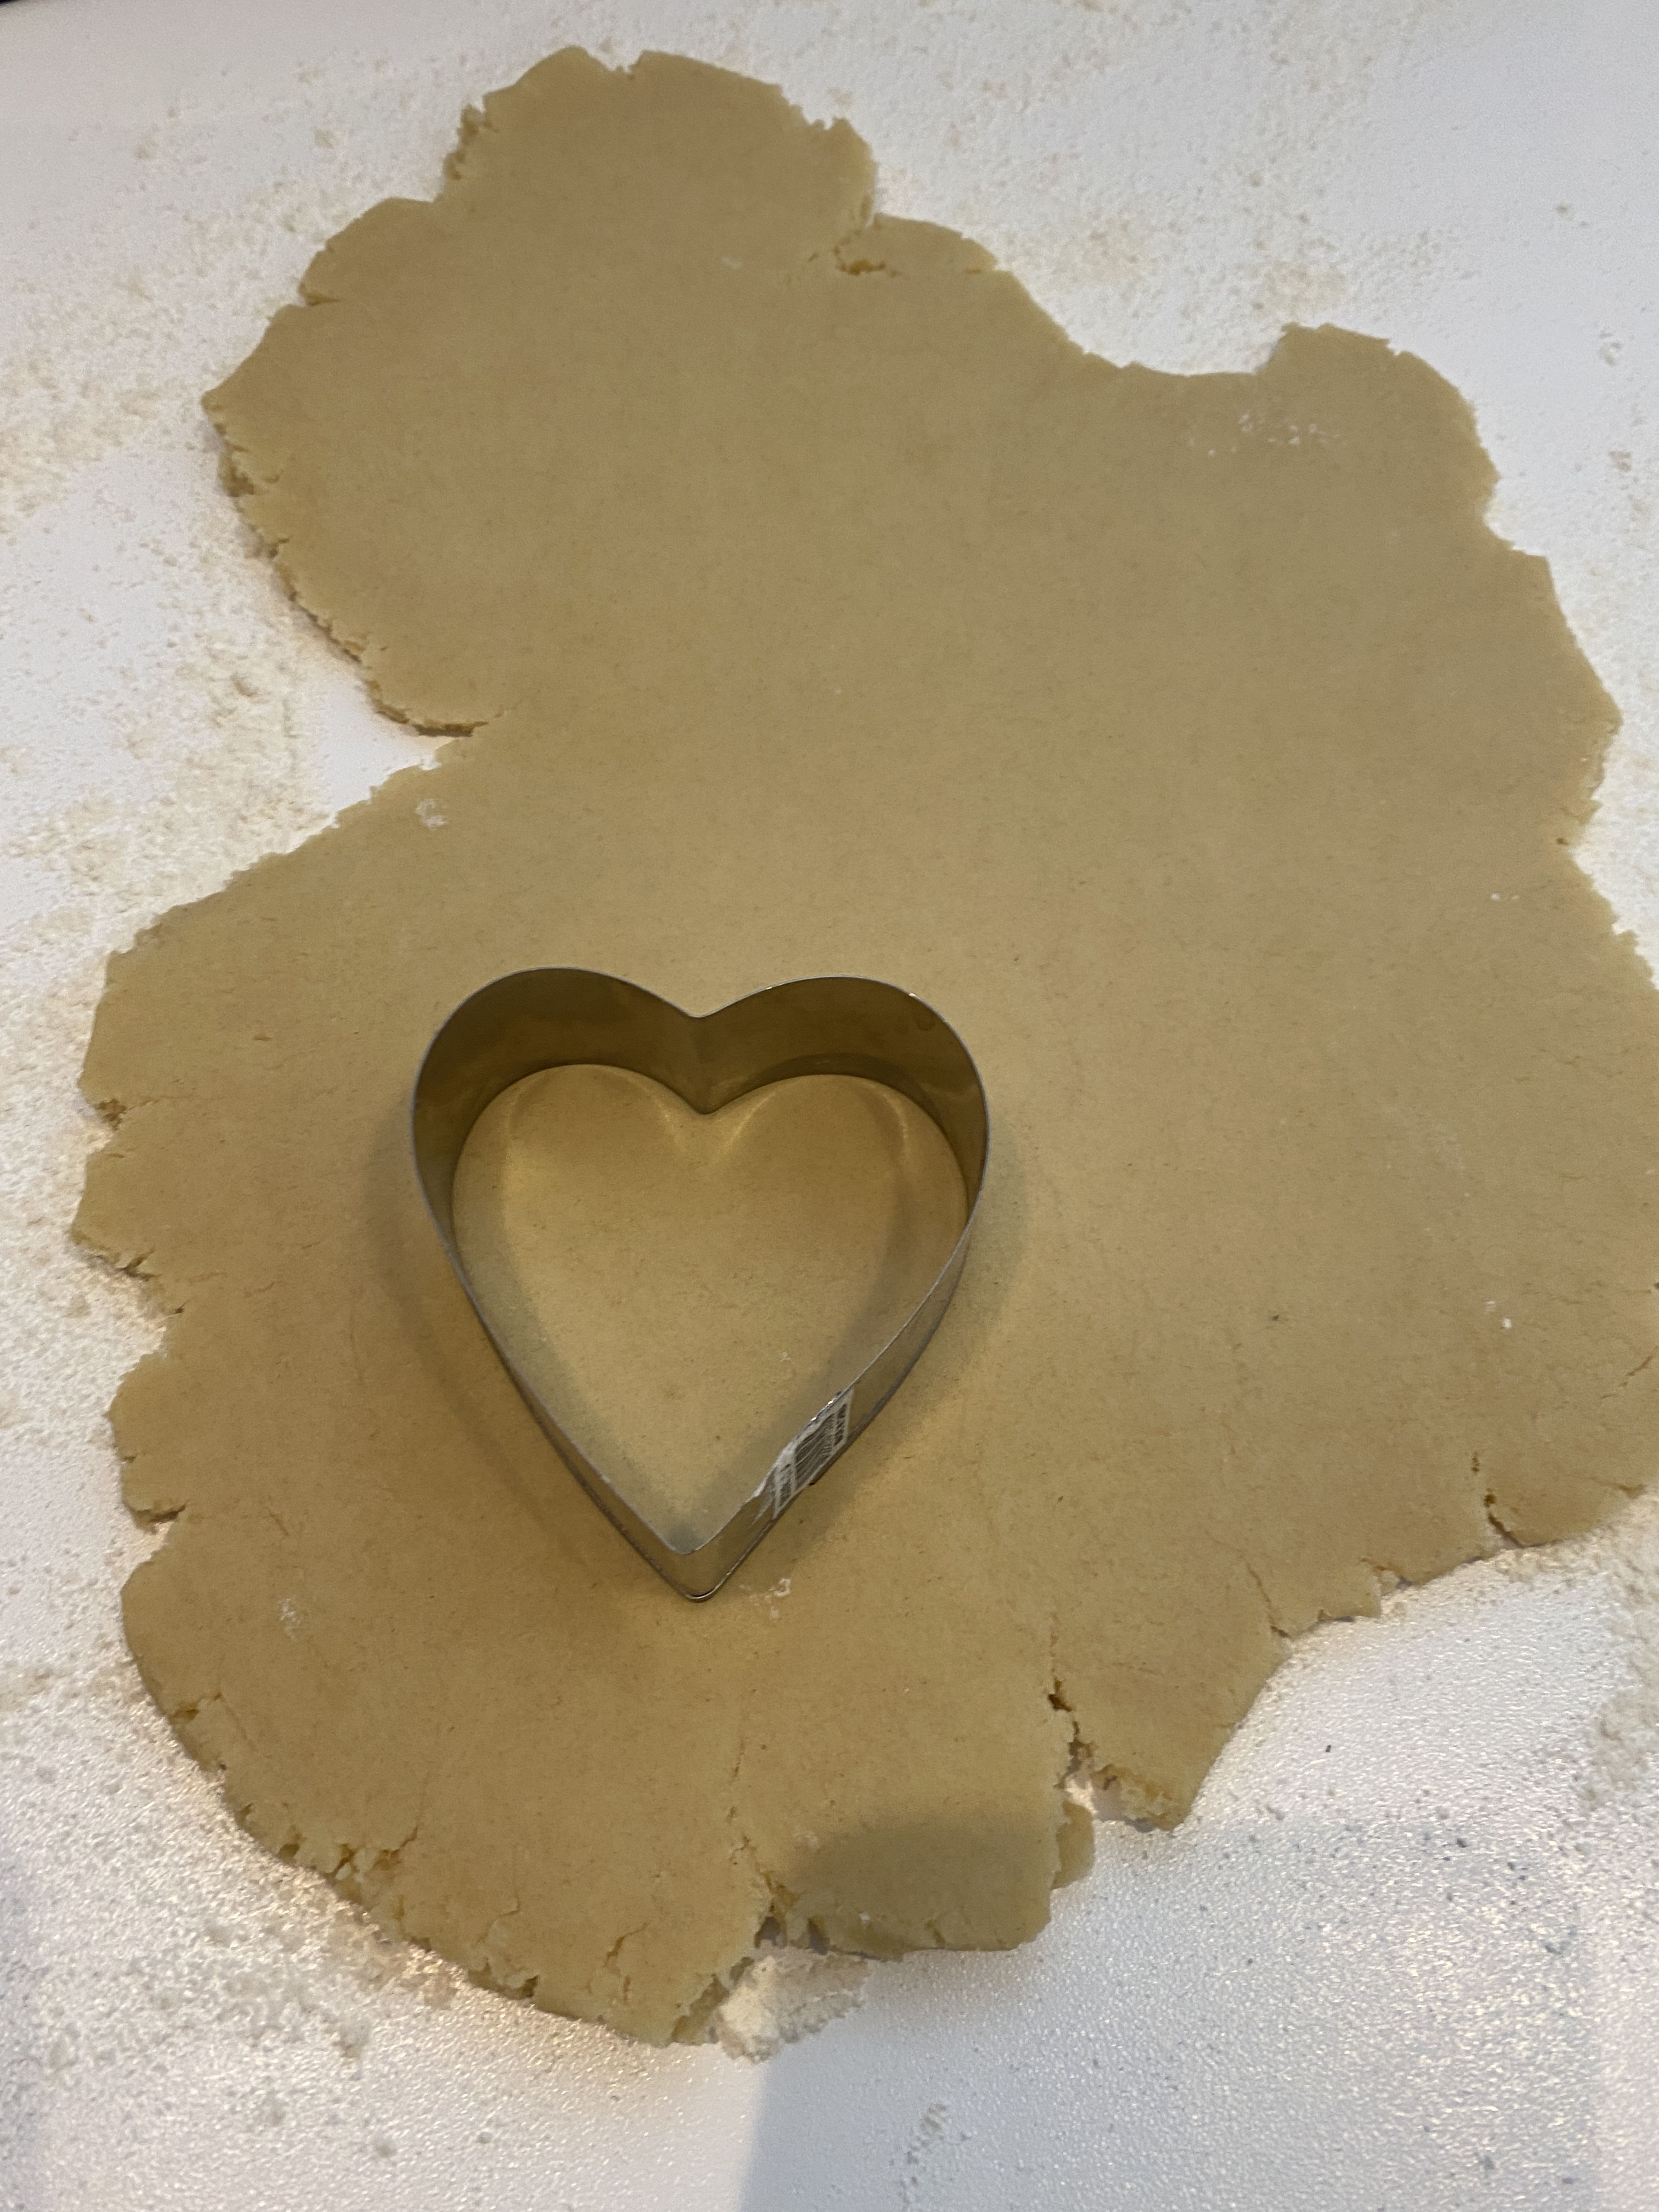 On a lightly floured surface, roll out the dough to a thickness of 2.5cm/1in. Stamp out about as many hearts shaped biscuit cutter (or any other shape!) as you can. 